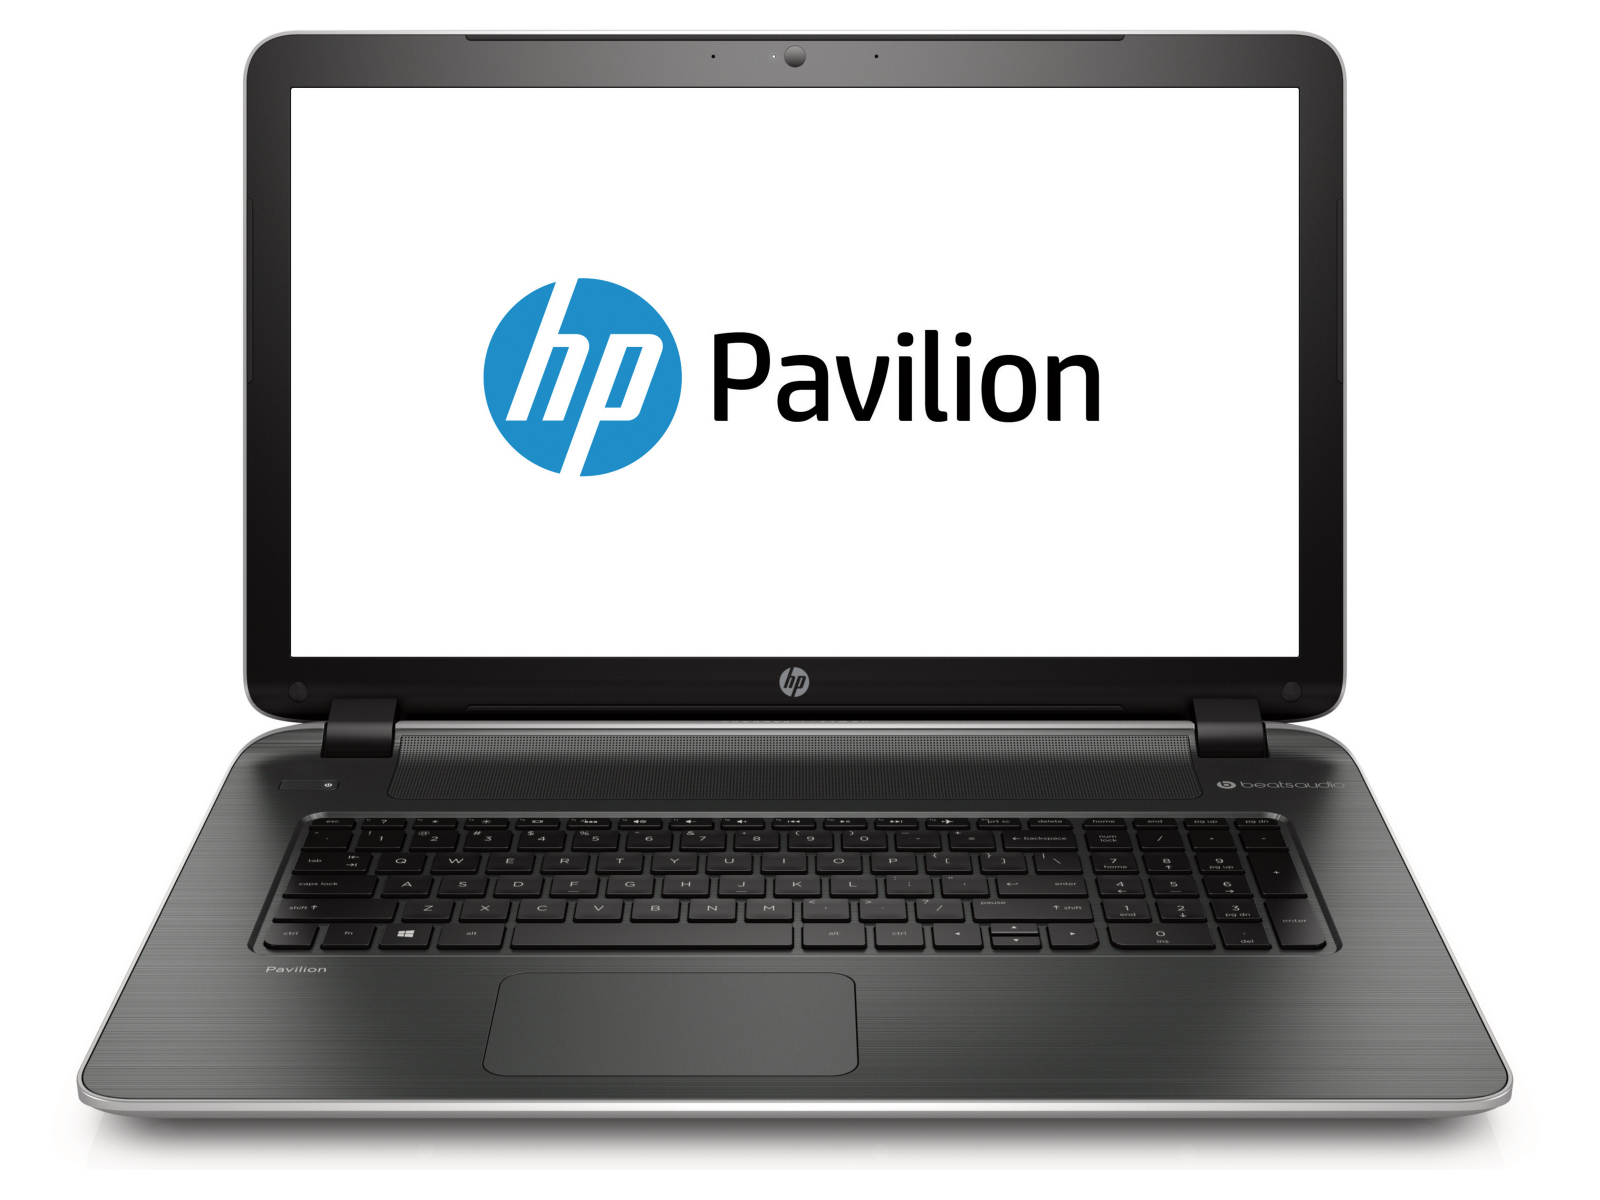 HP Pavilion 17-f130ng Notebook Review Update - NotebookCheck.net Reviews